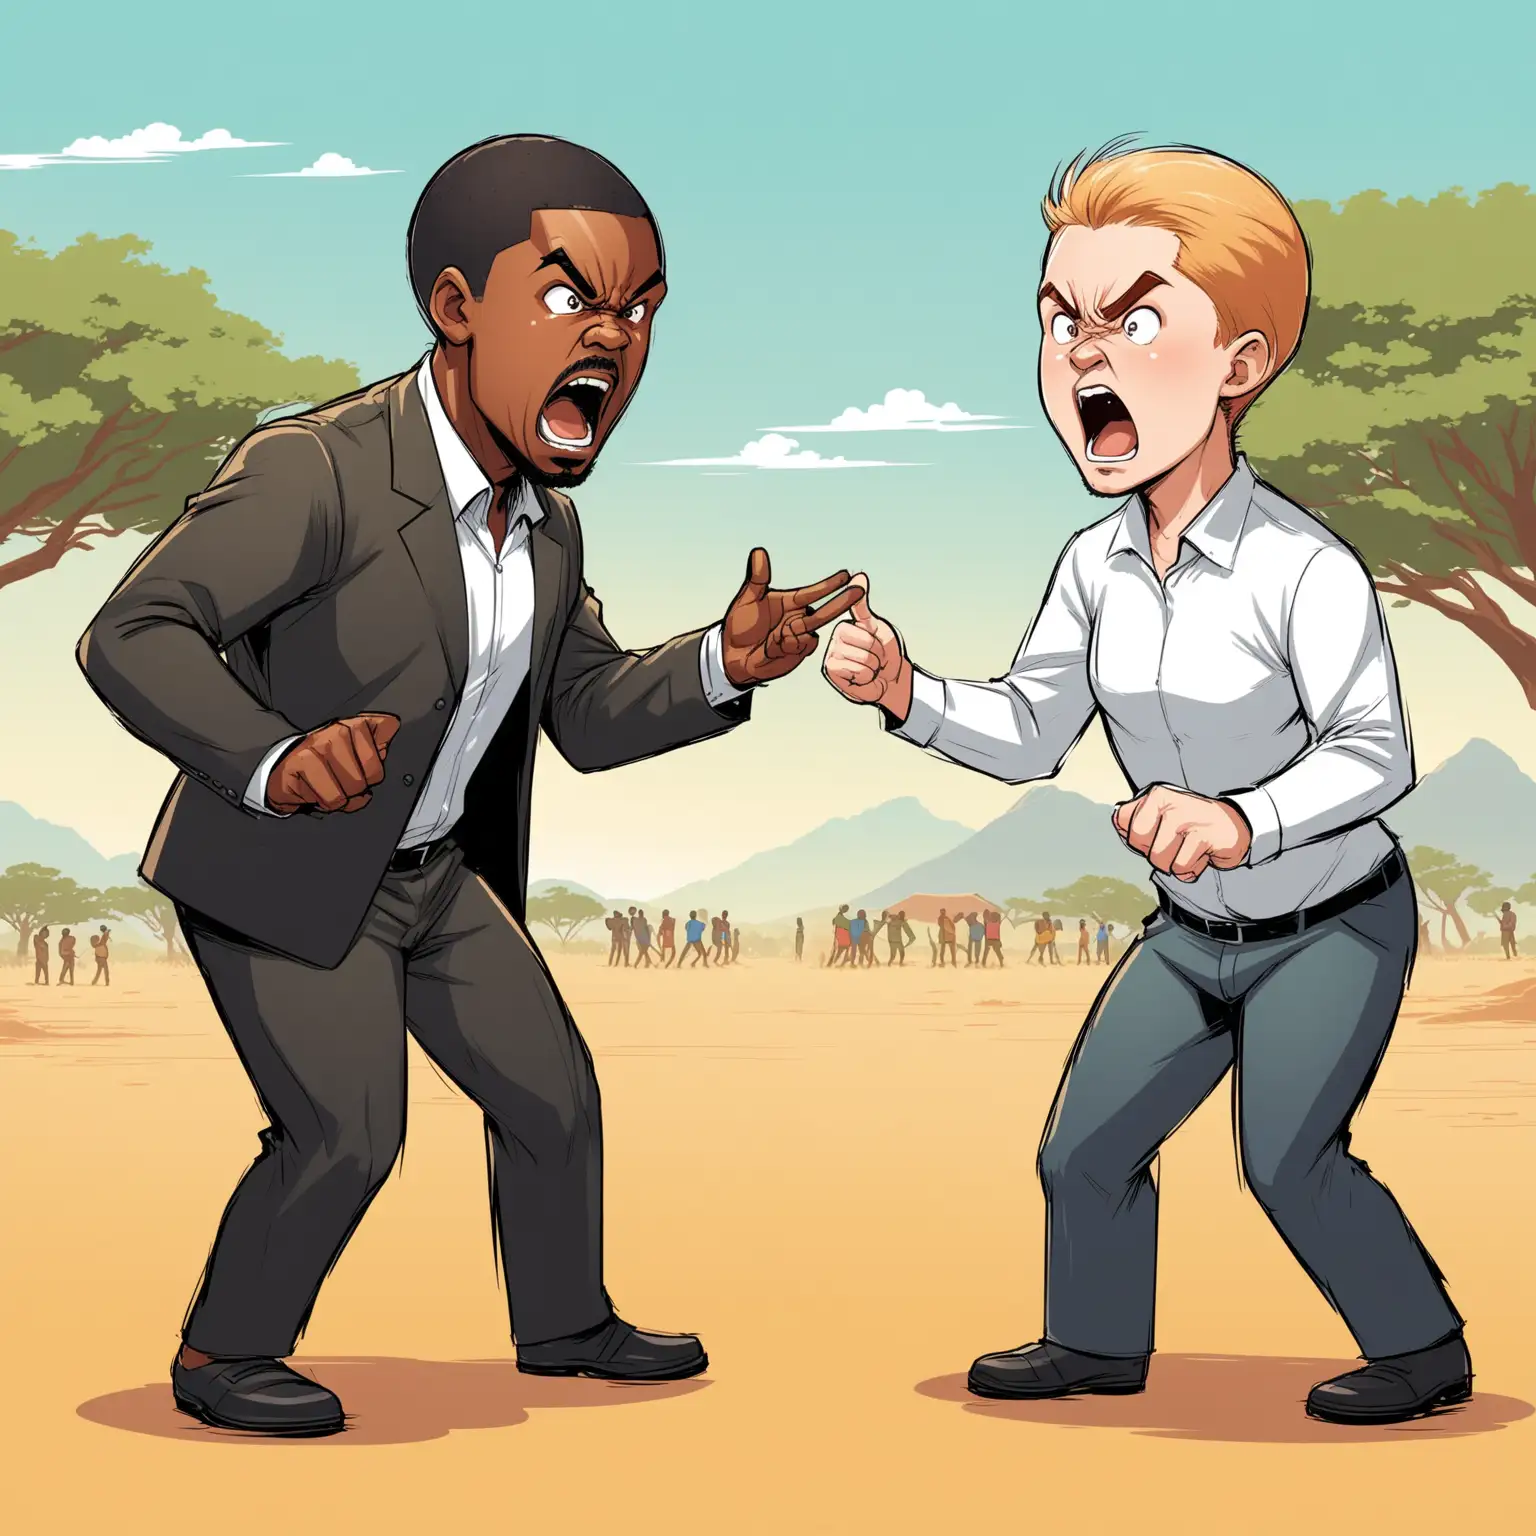 Argument between Black and White Individuals in South Africa